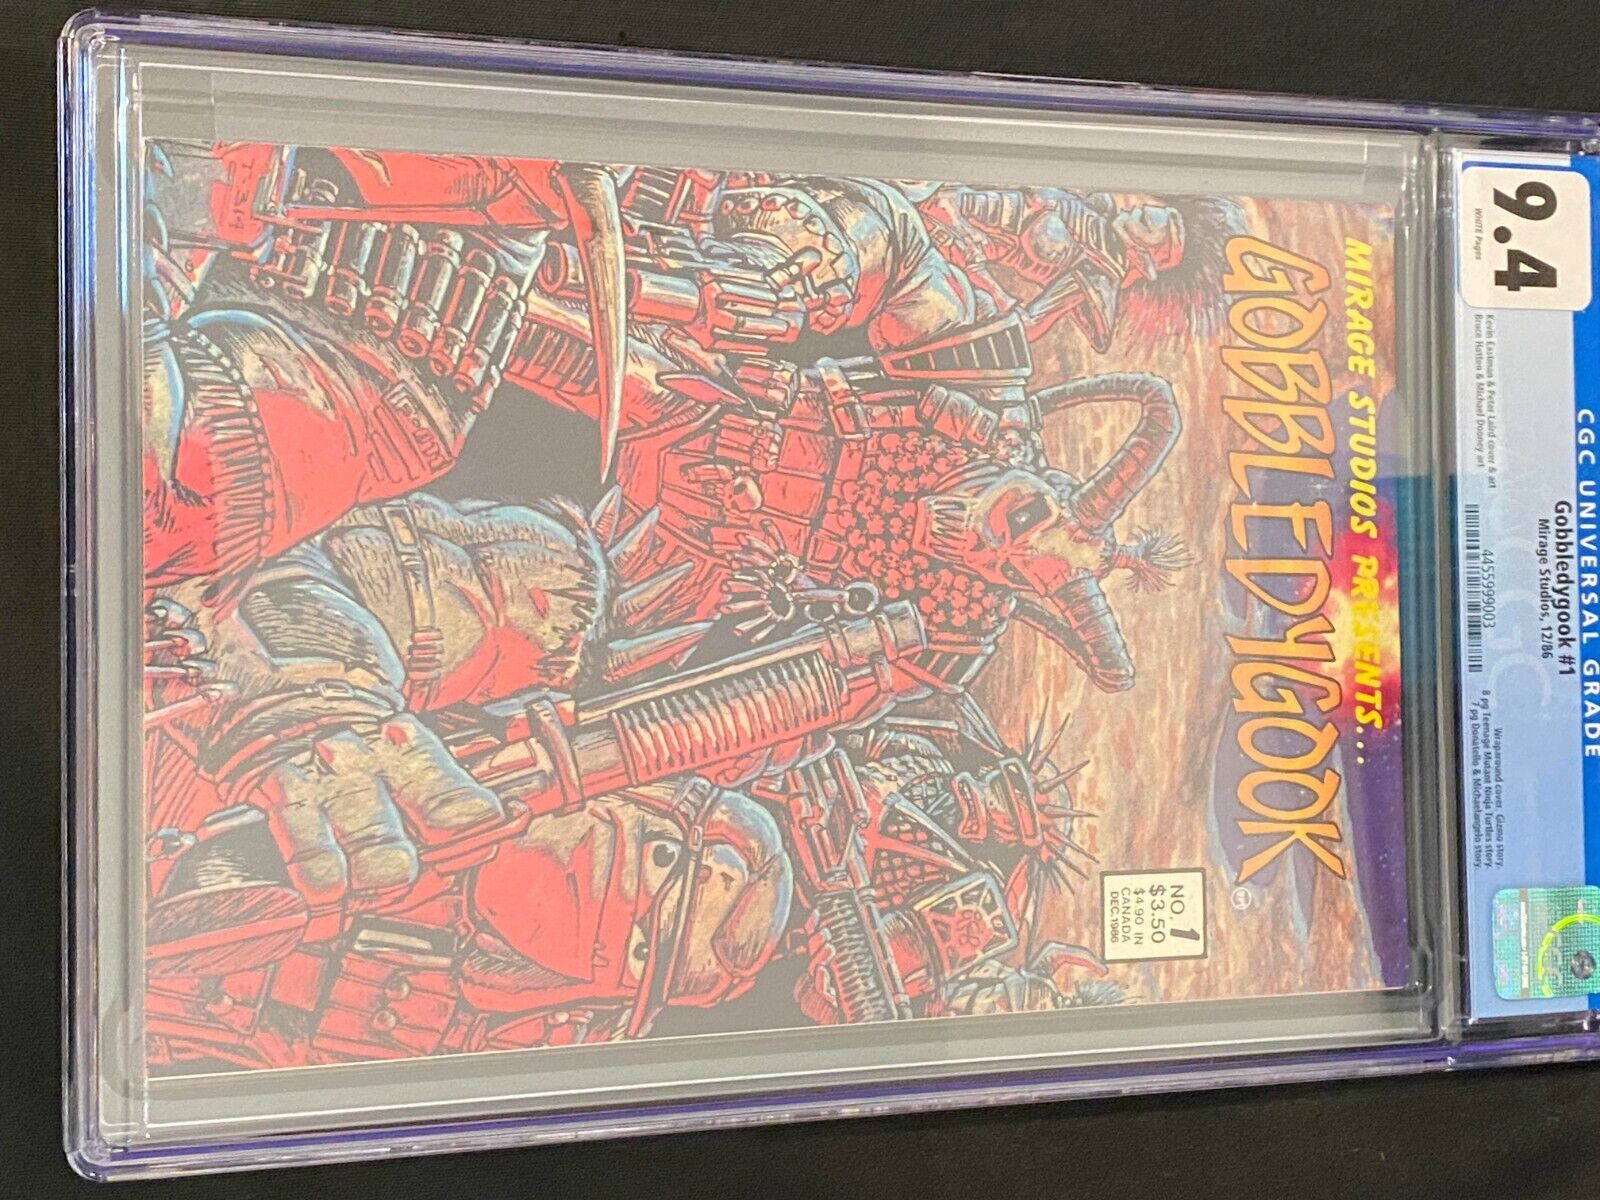 Gobbledygook #1 1986 Eastman & Laird CGC 9.6 Newly Graded